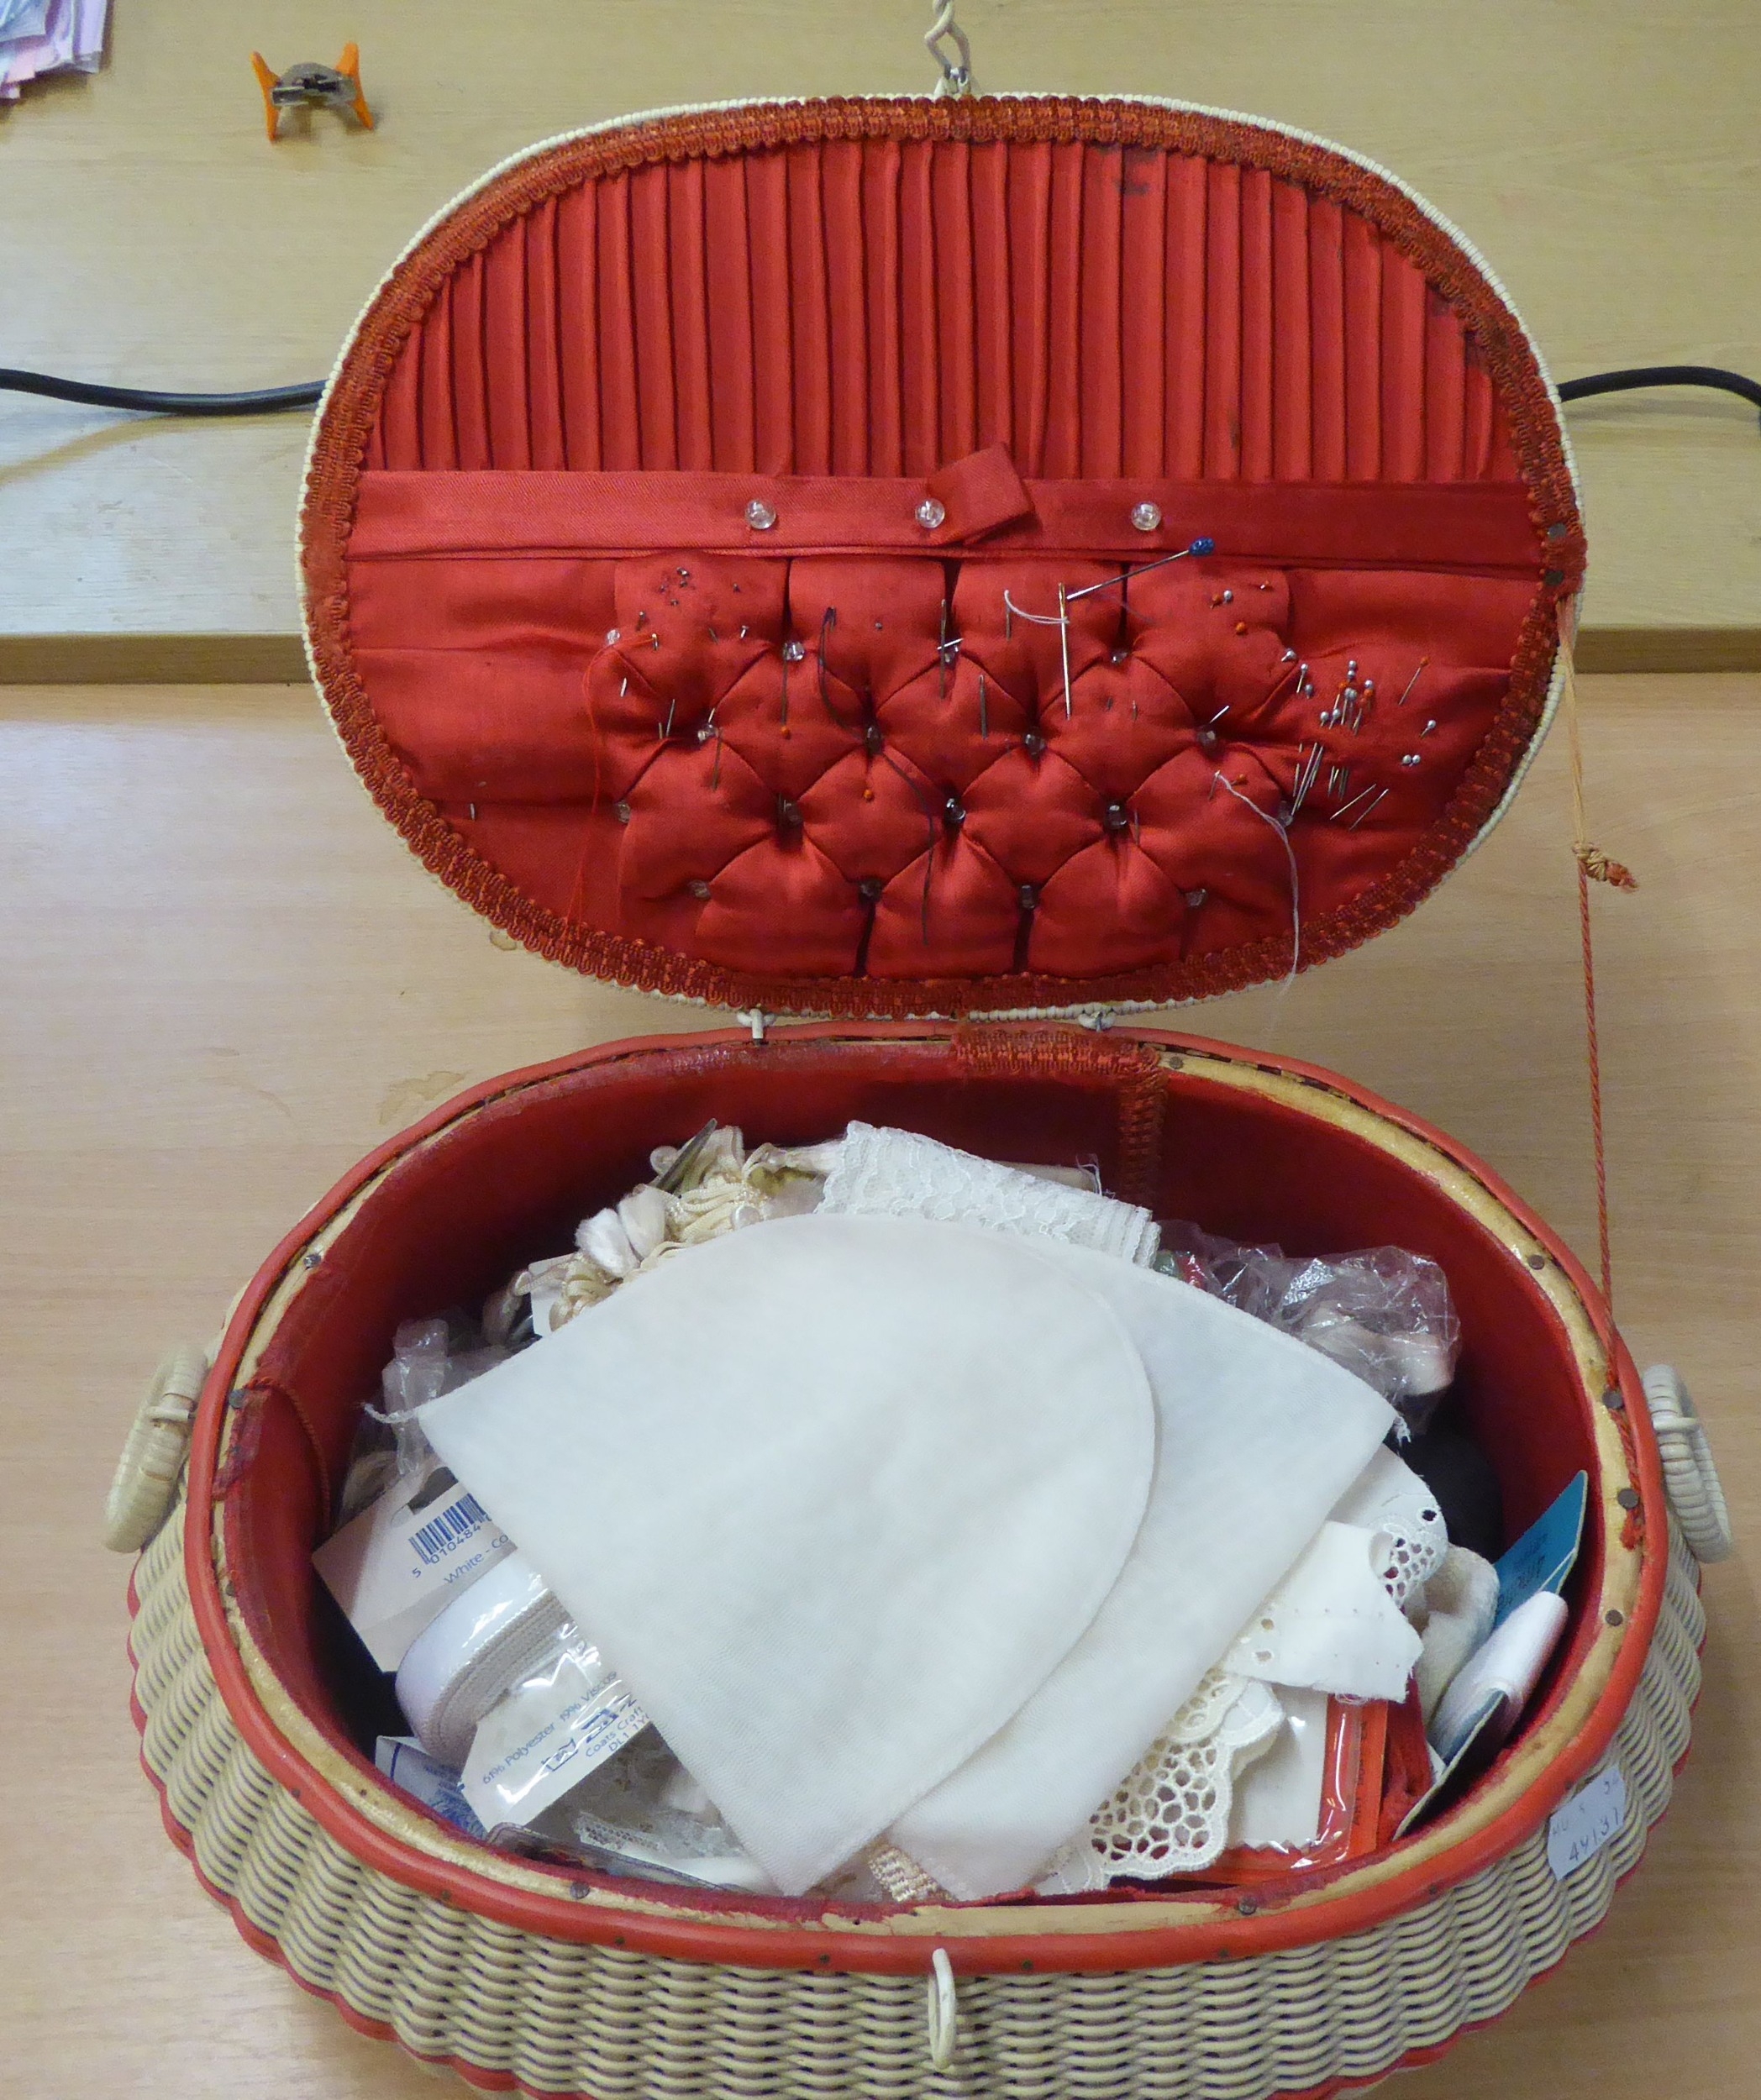 A SEWING BASKET WITH COLLARS, A LARGE QUANTITY OF BUTTONS AND SEWING IMPLEMENTS, PLUS SOME MATERIAL - Image 2 of 2